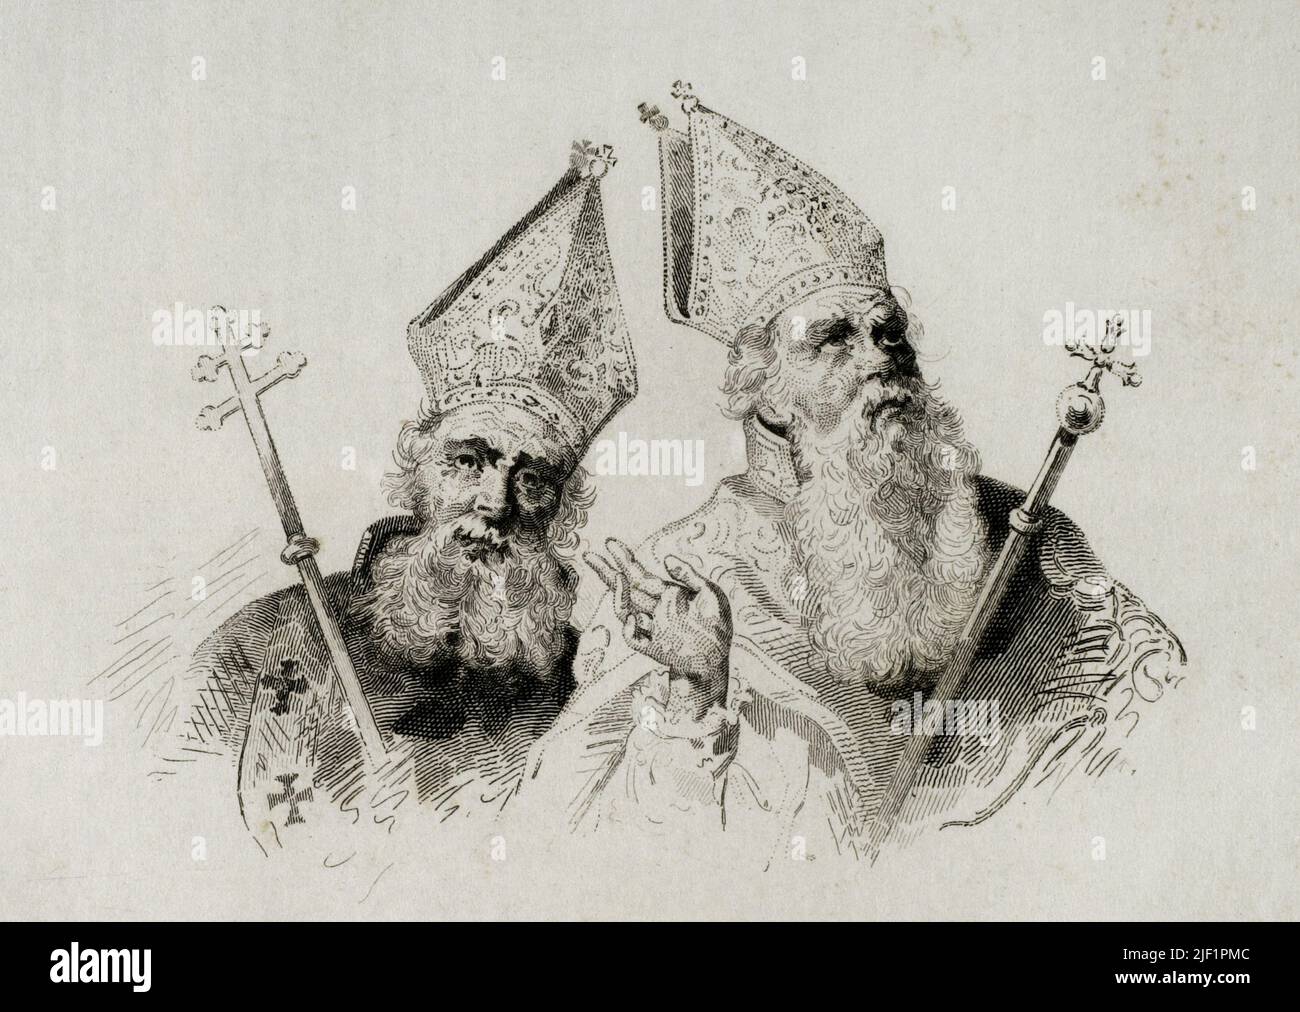 St. Gregory the Enlightener (257-ca. 330) (left of the image). Founder and patron saint of the Armenian Apostolic Church. On the right, his son: Arisdagés. Armenian prelate and martyr. Engraving drawn by H. Lalaisse. Engraved by Moret. 'Panorama Universal. Historia de la Armenia', 1838. Stock Photo